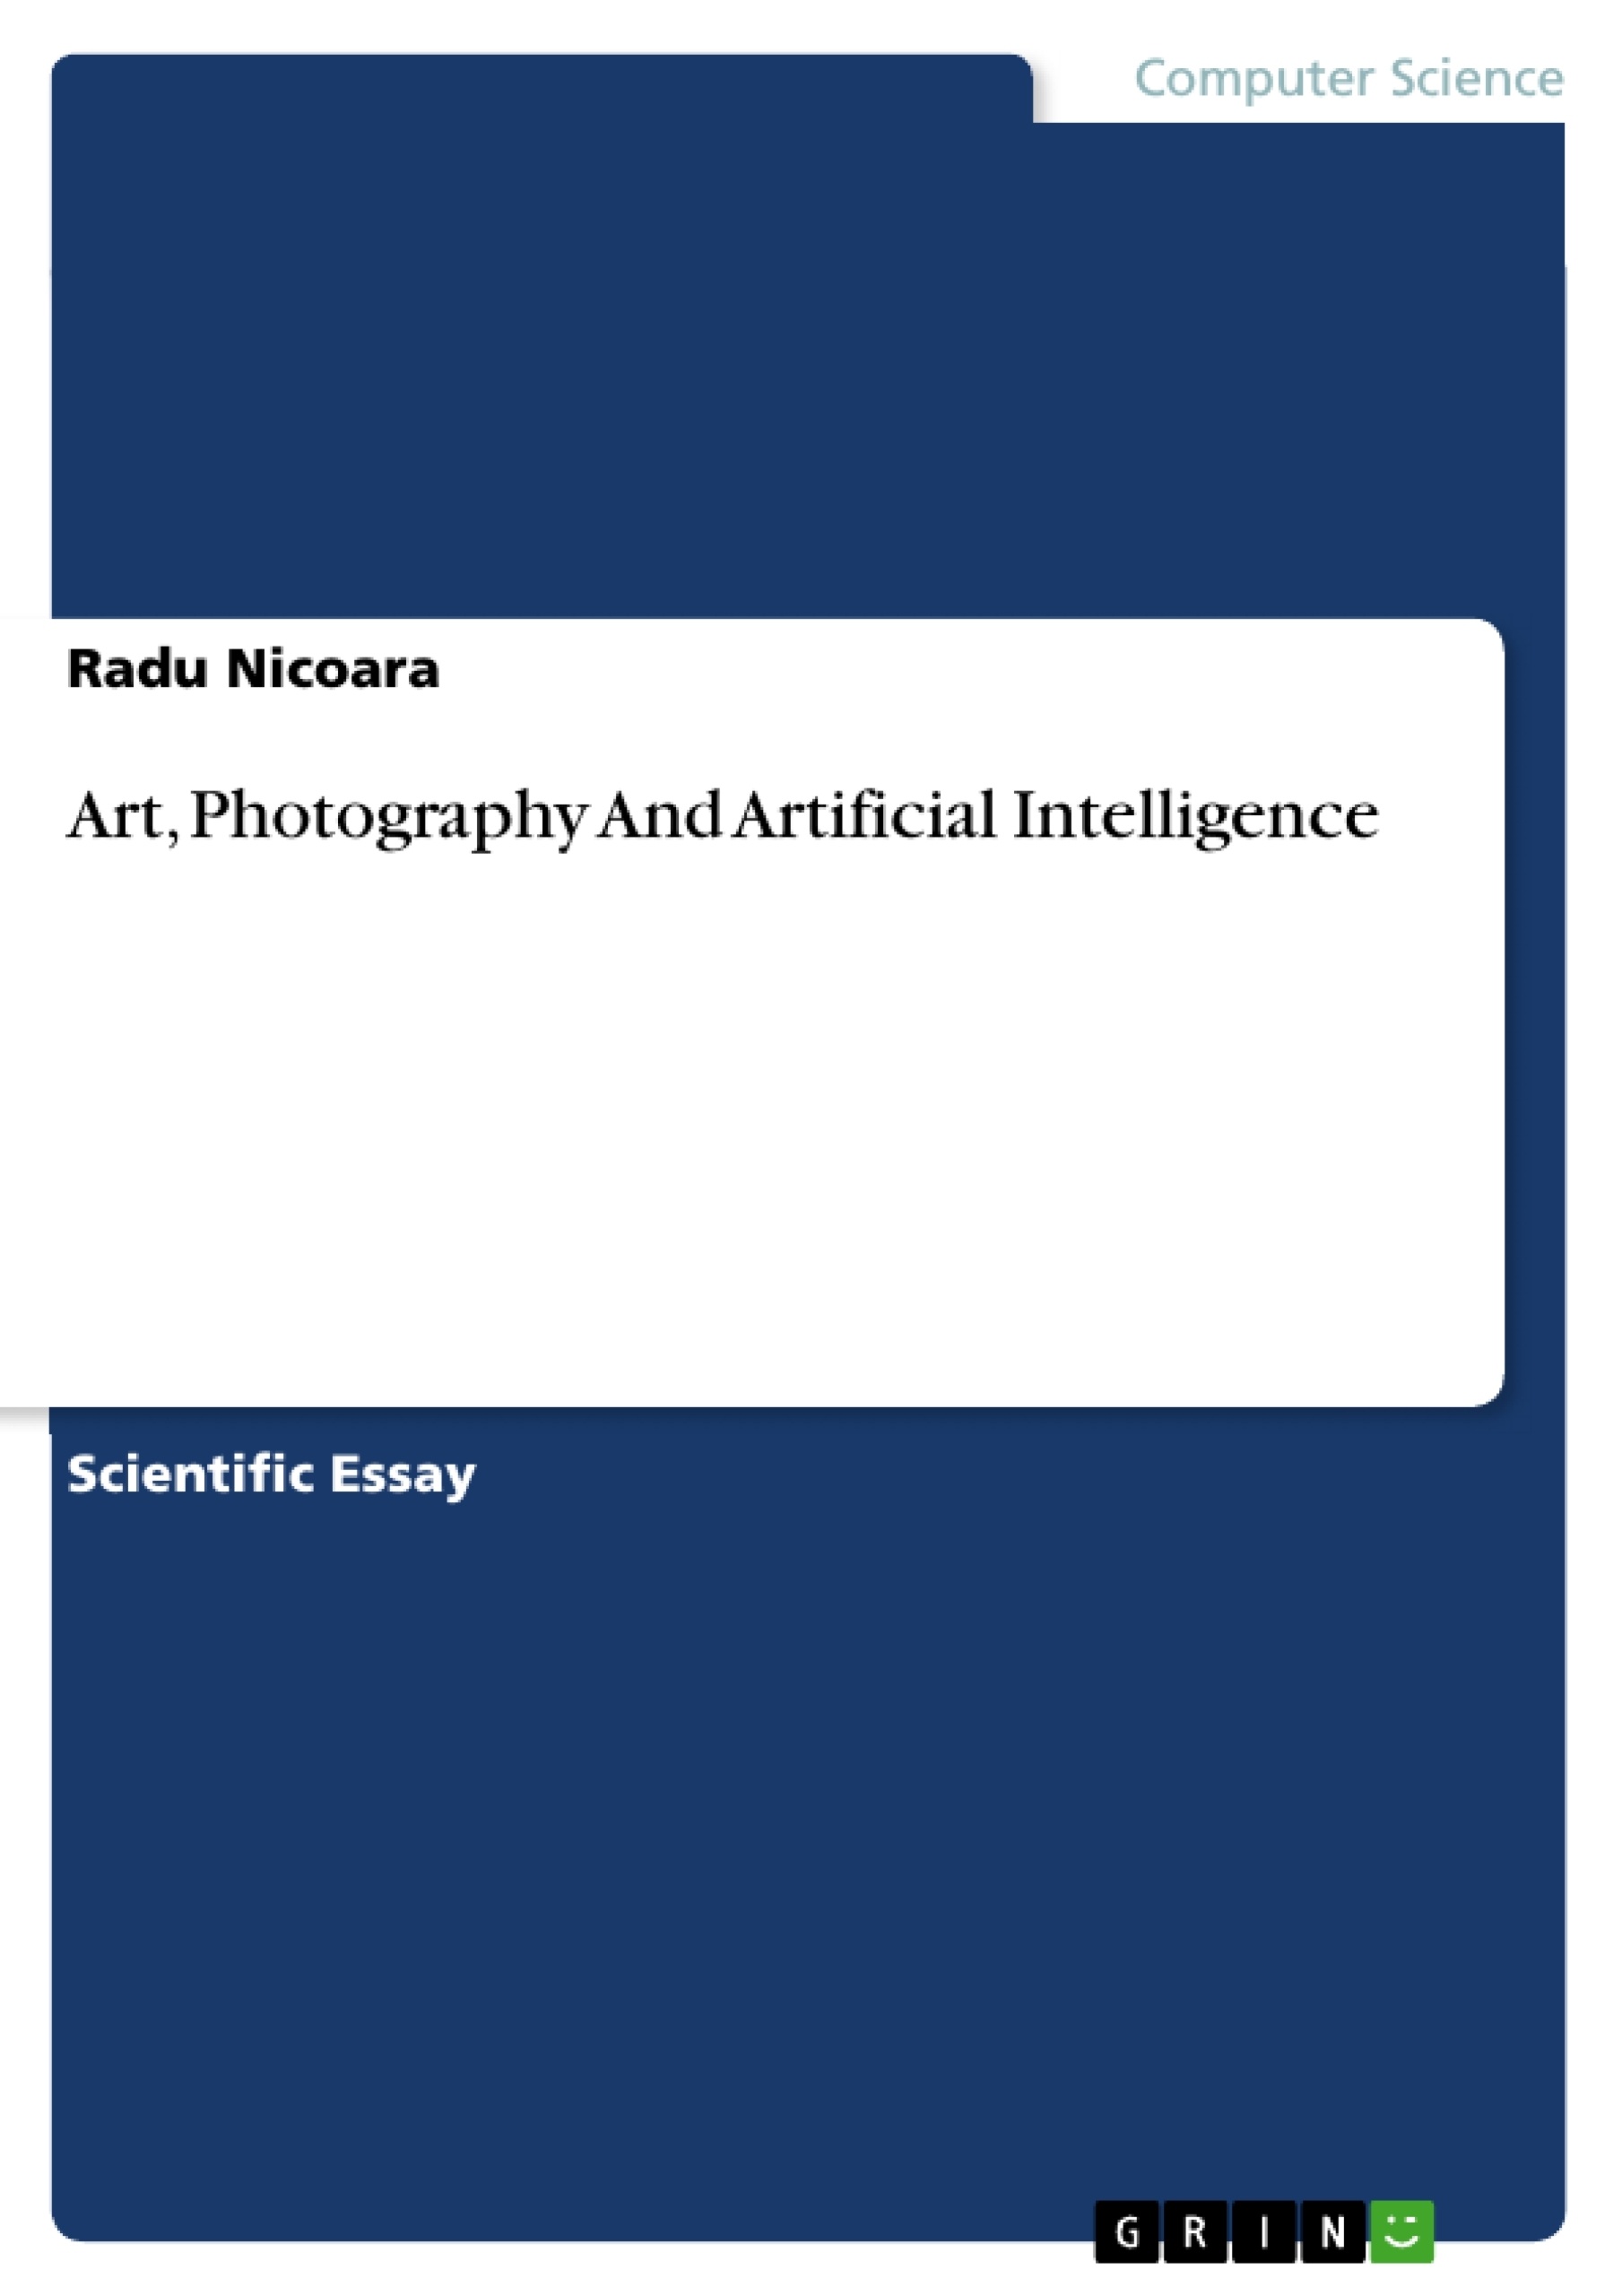 Título: Art, Photography And Artificial Intelligence